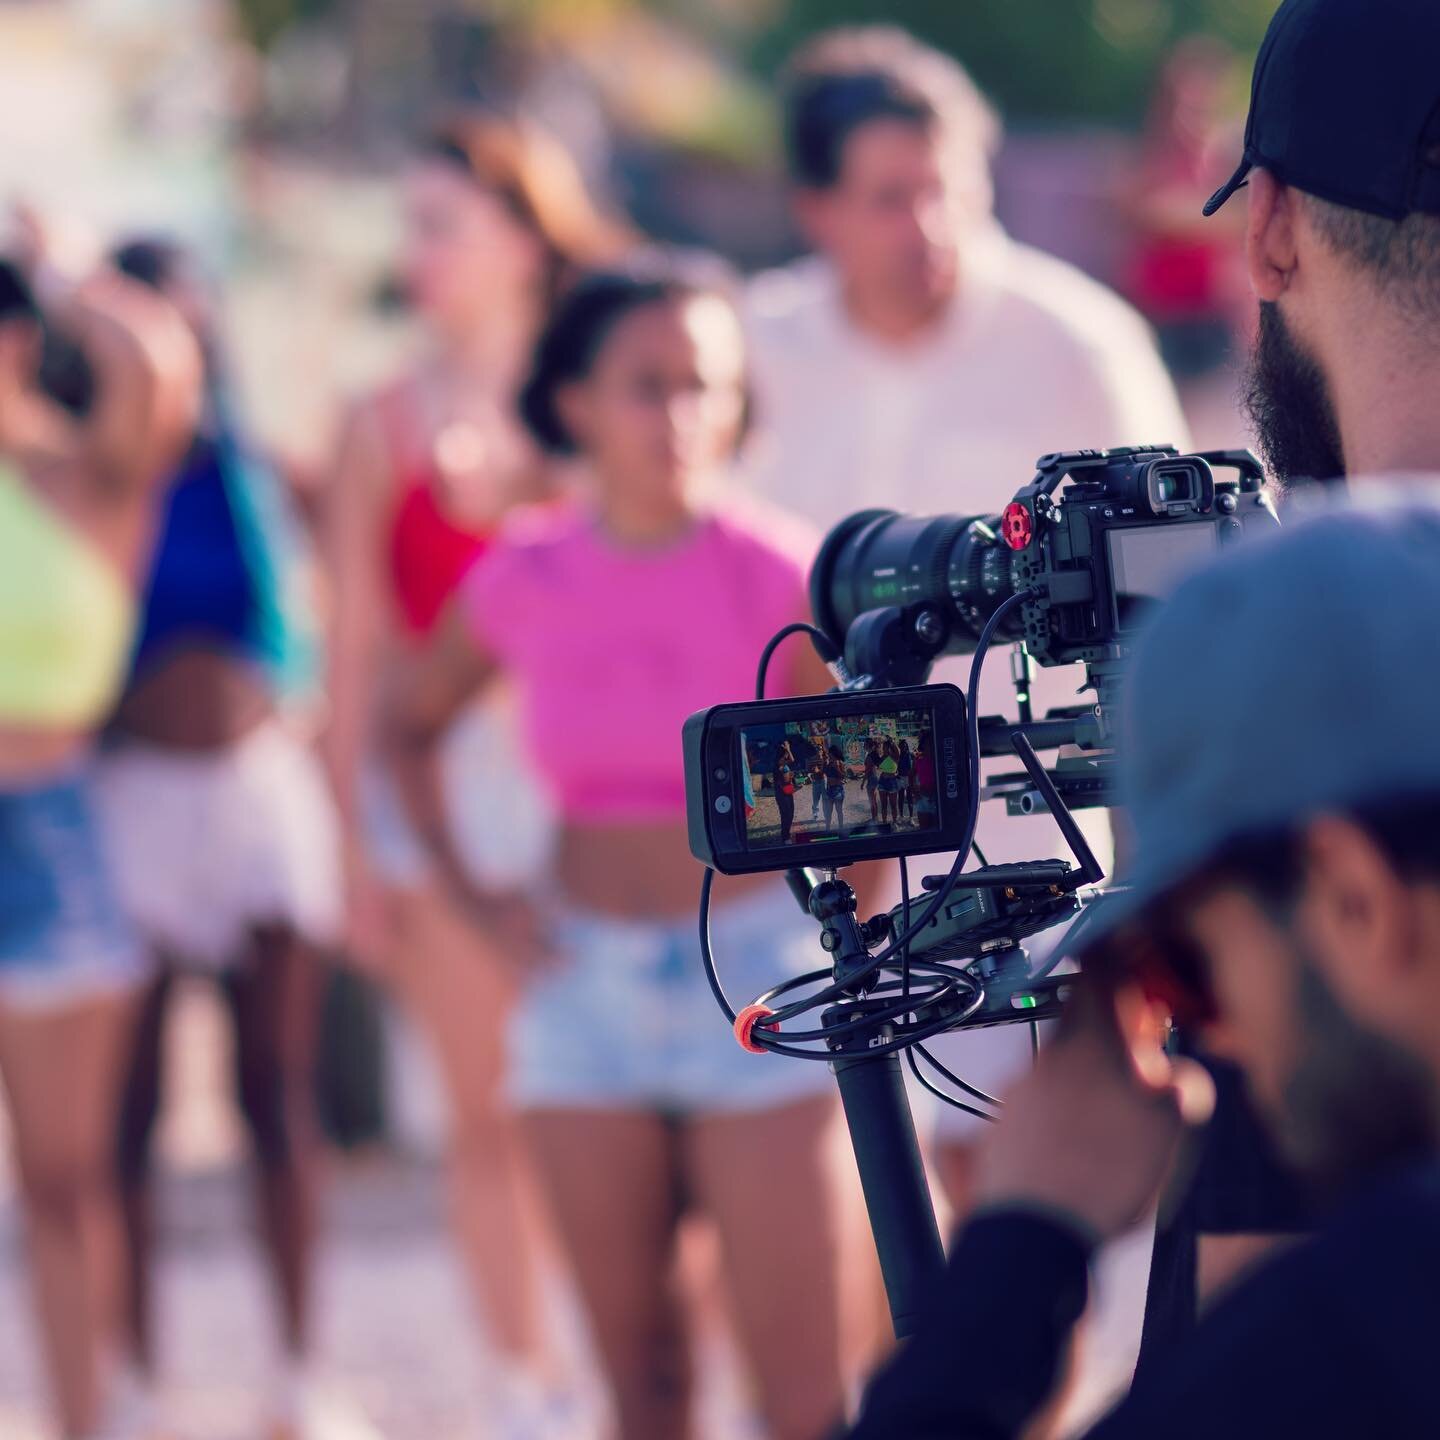 BTS from our music video shoot from last week, great project!

#music #musicvideo #producer #production #productioncompany #popgroup #girlband #dancing #sanjuan #puertorico #cereprods